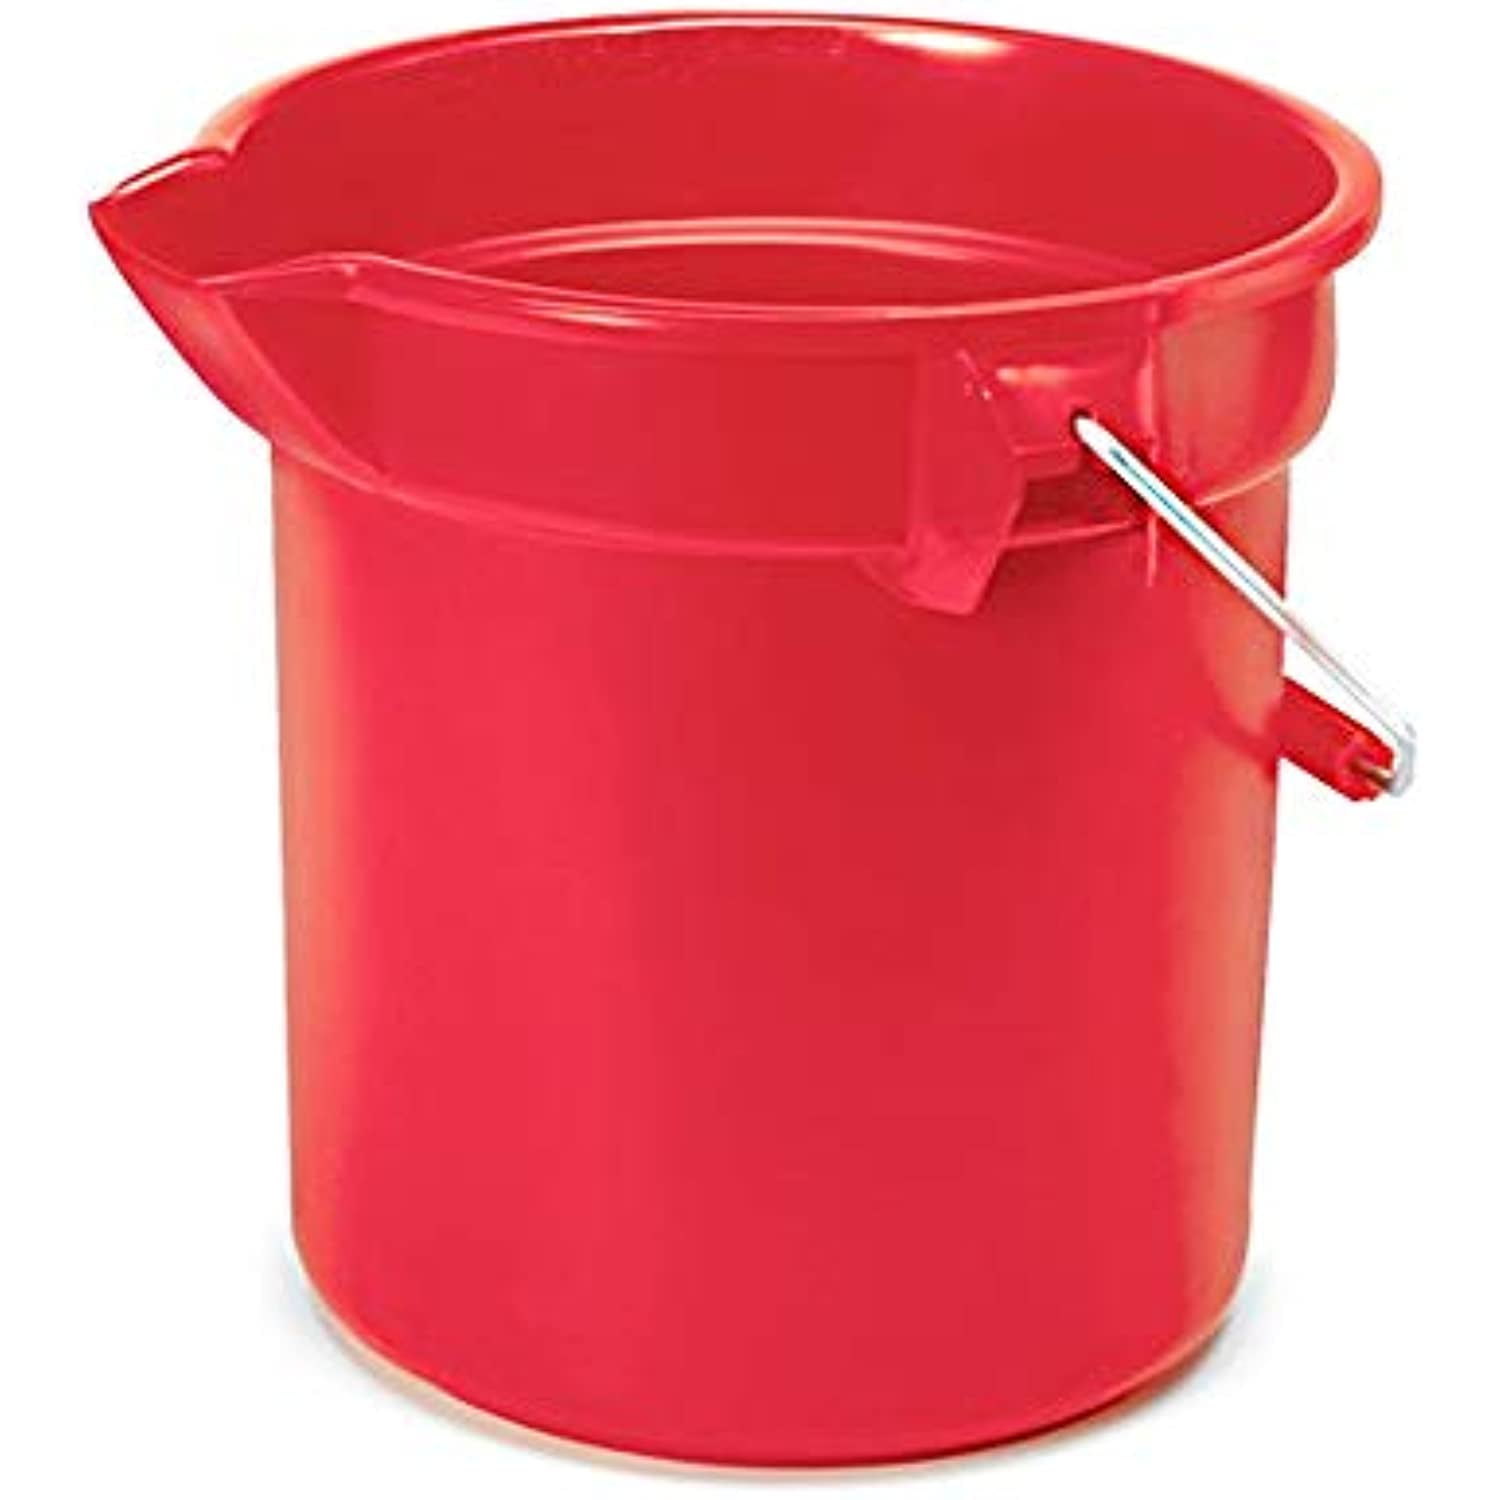  Rubbermaid Commercial Products Brute Heavy-Duty Round Bucket,  10-Quart, Gray, Corrosive-Resistant Pail with Handle for Cleaning/Material  Transport, 2.5 Gallon : Health & Household